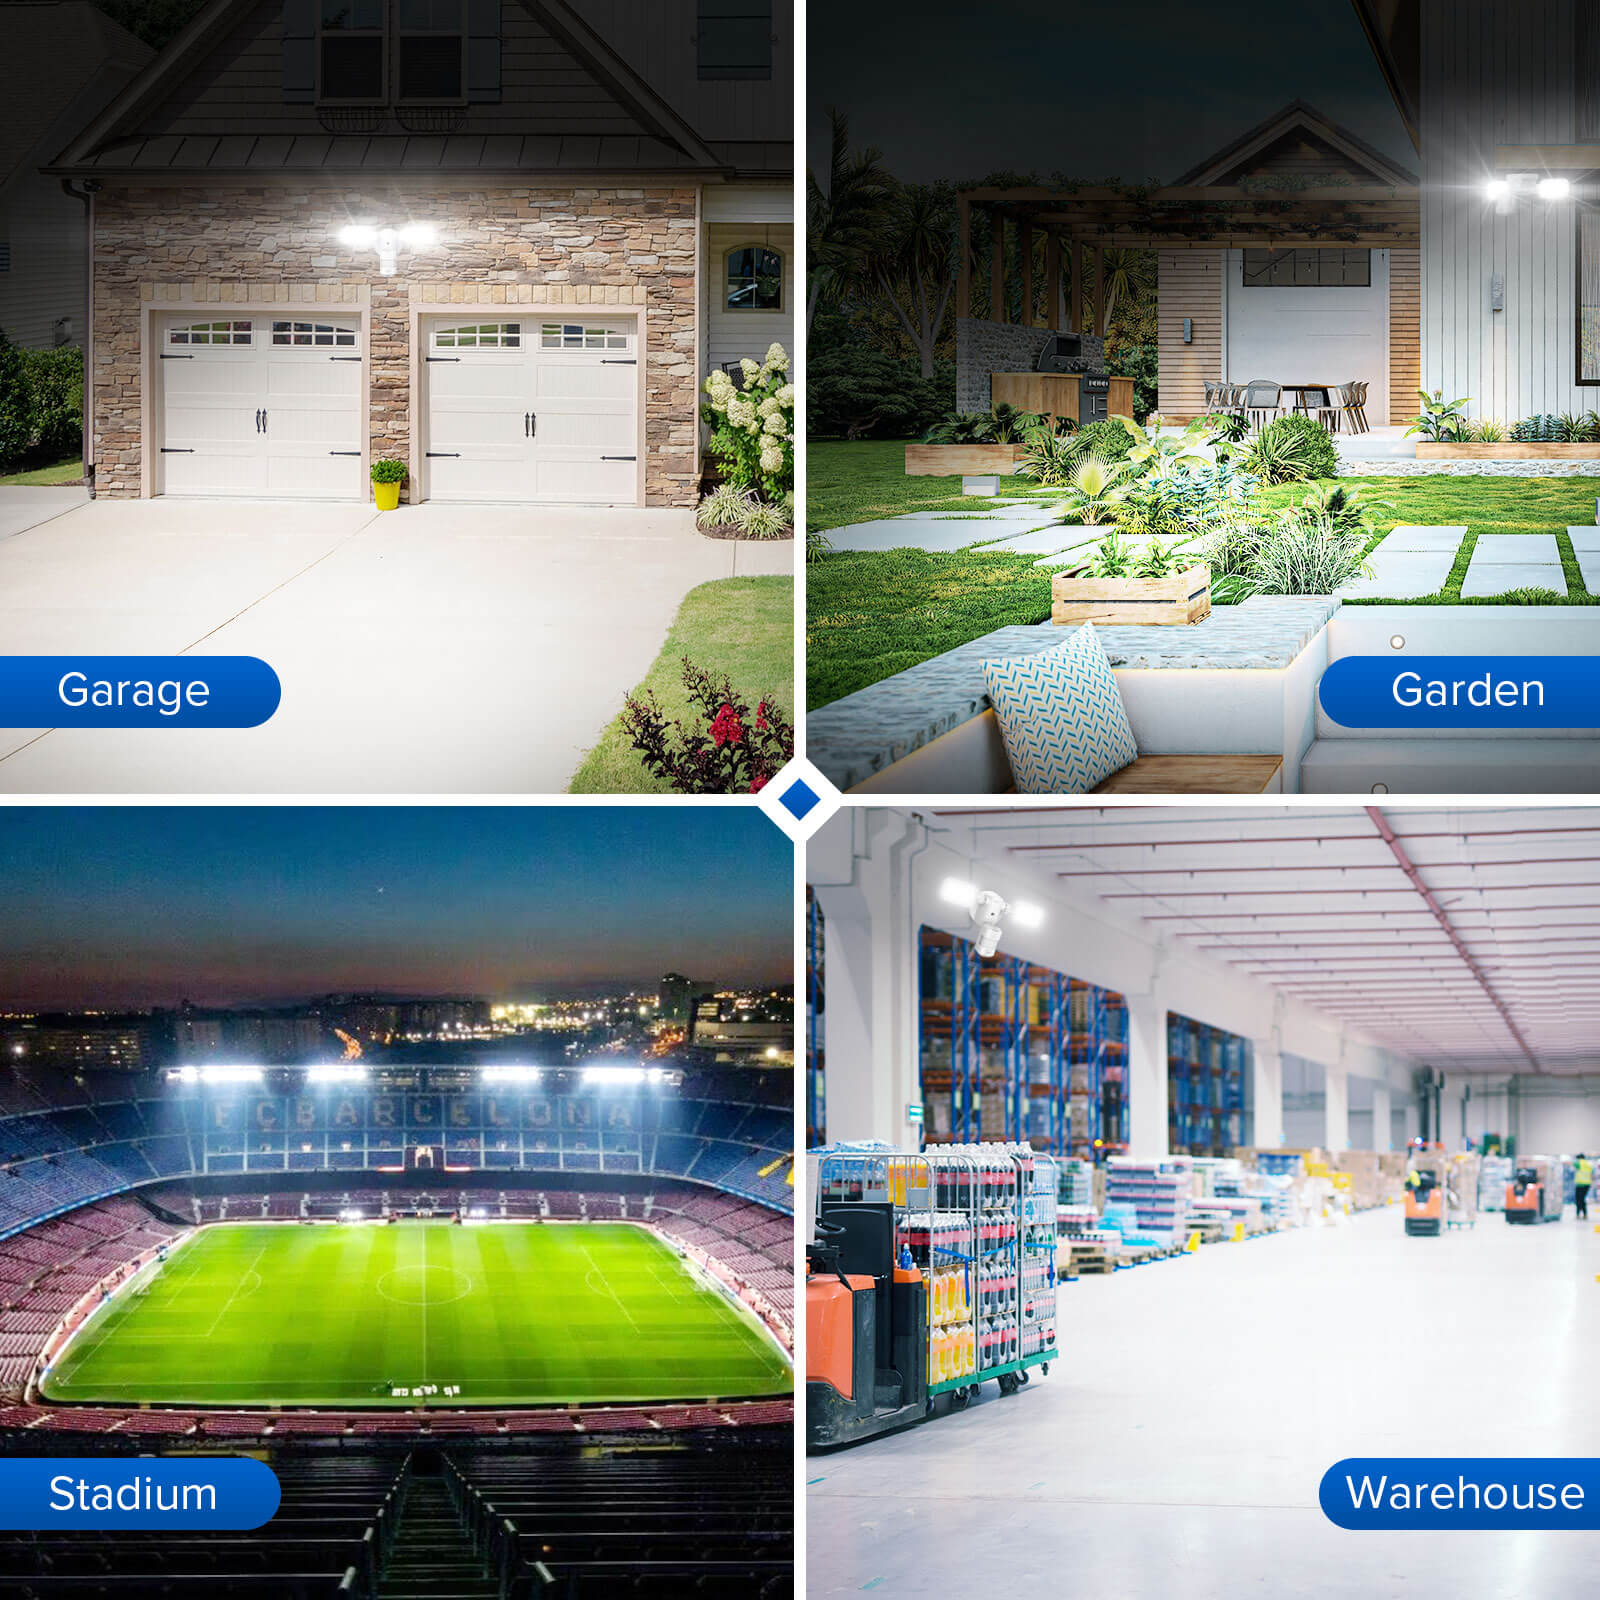 90W LED Security Light (Dusk to Dawn & Motion Sensor) is suitable for garage, garden, stadium and warehouse